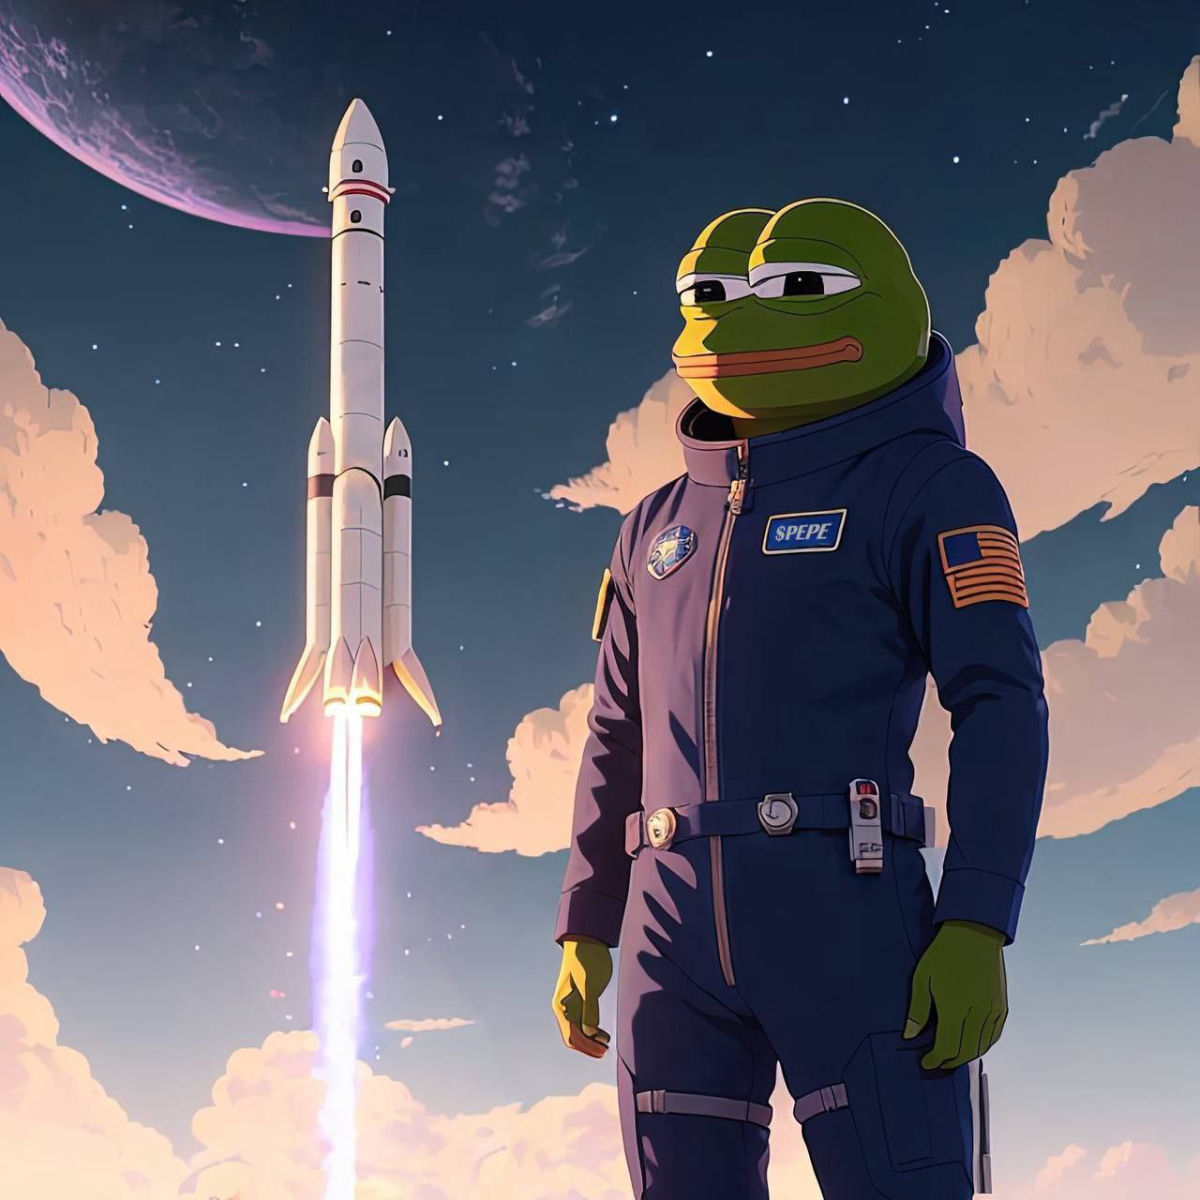 Pepe to the moon